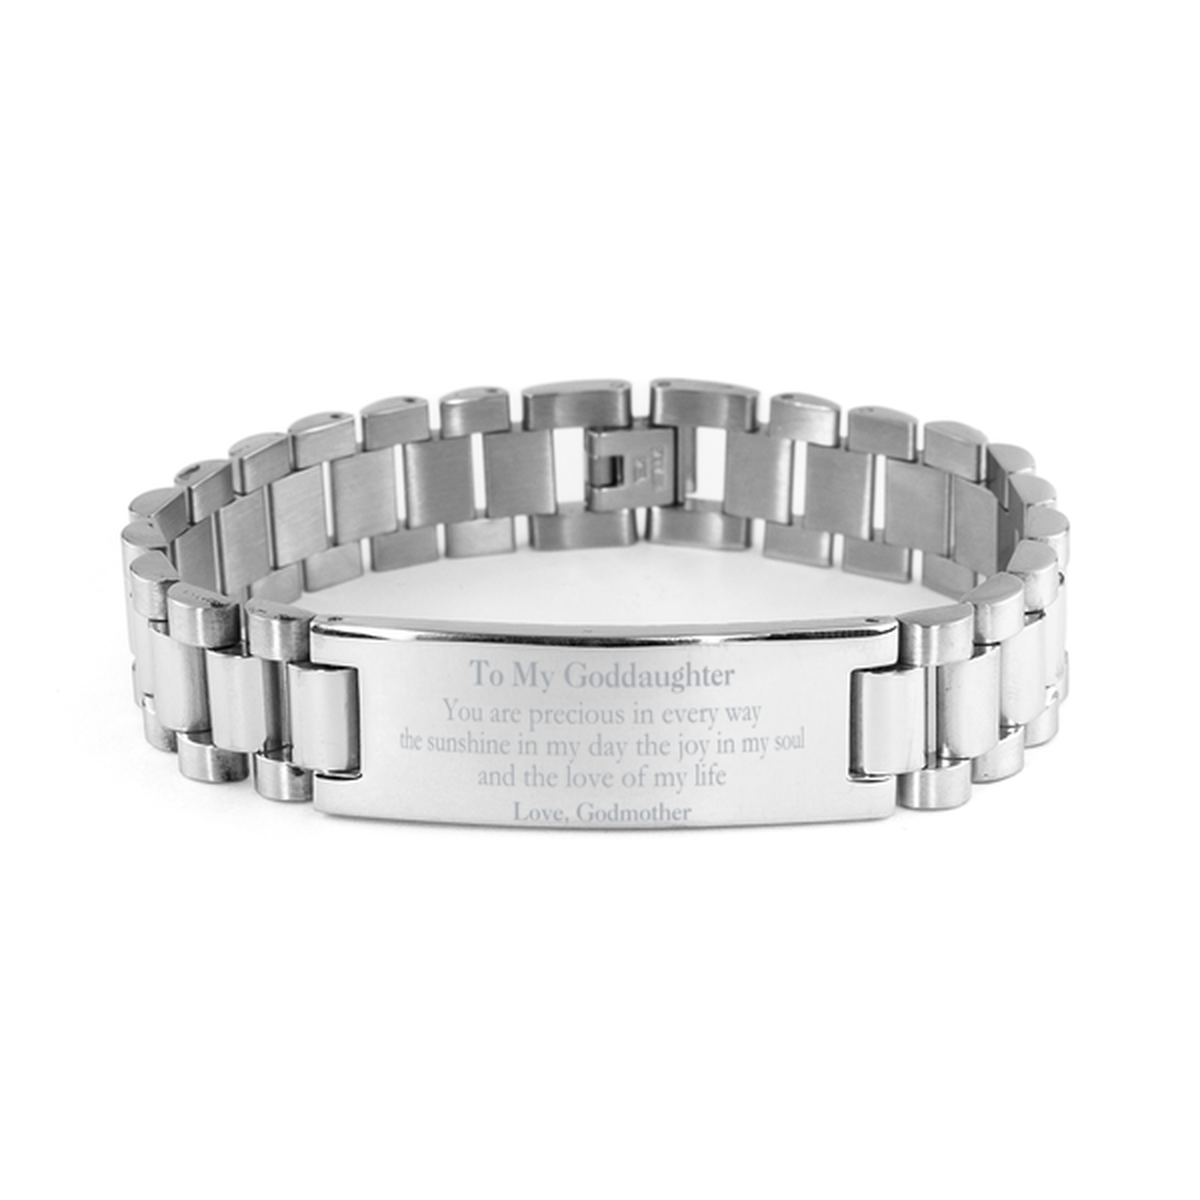 Graduation Gifts for Goddaughter Ladder Stainless Steel Bracelet Present from Godmother, Christmas Goddaughter Birthday Gifts Goddaughter You are precious in every way the sunshine in my day. Love, Godmother